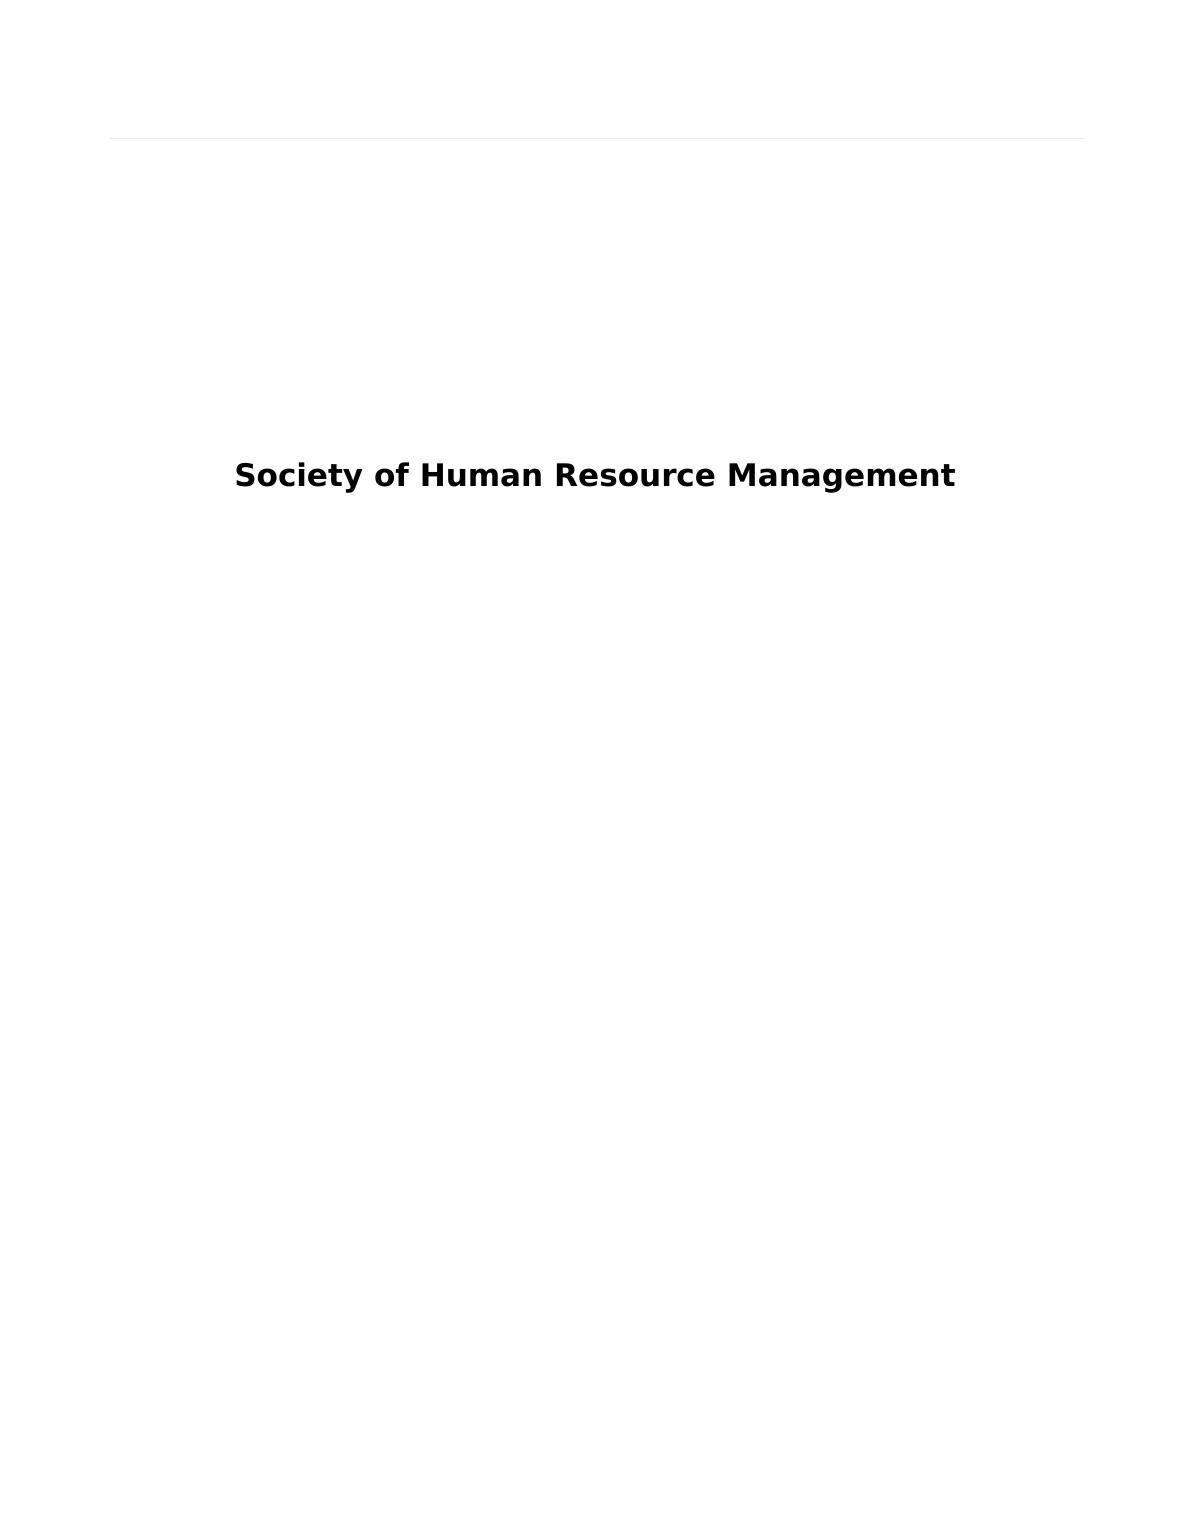 Society for Human Resource Management_1